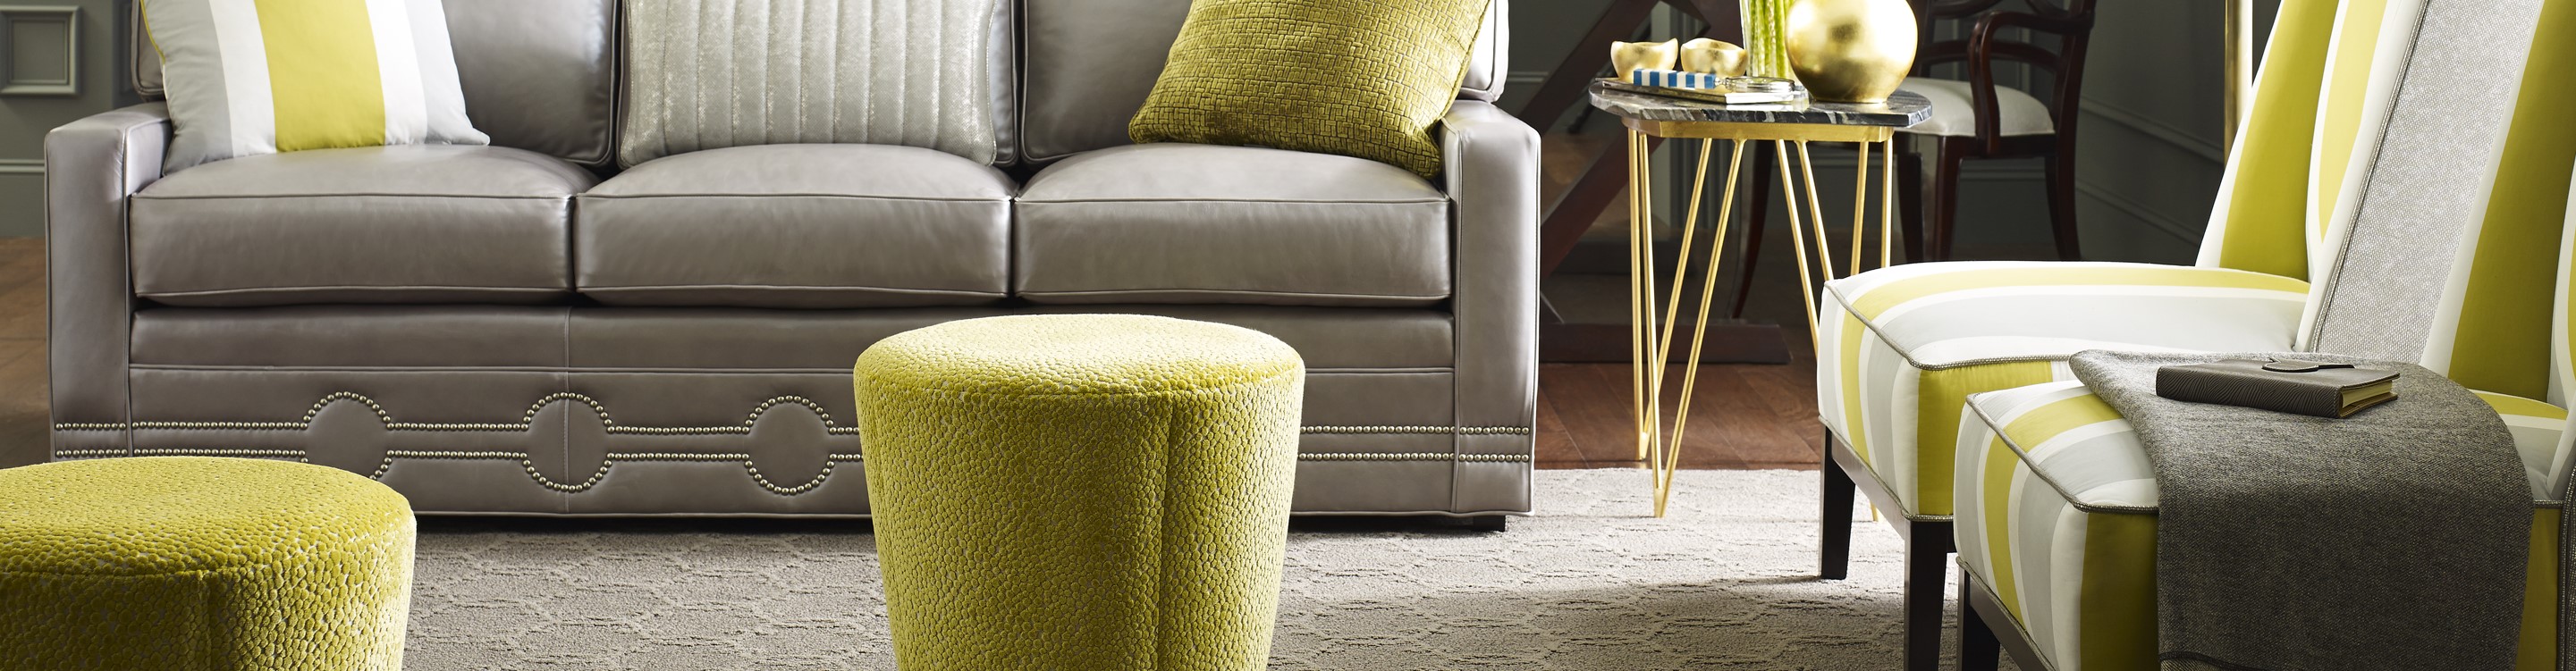 Beige area rug in a living room with lime green accents